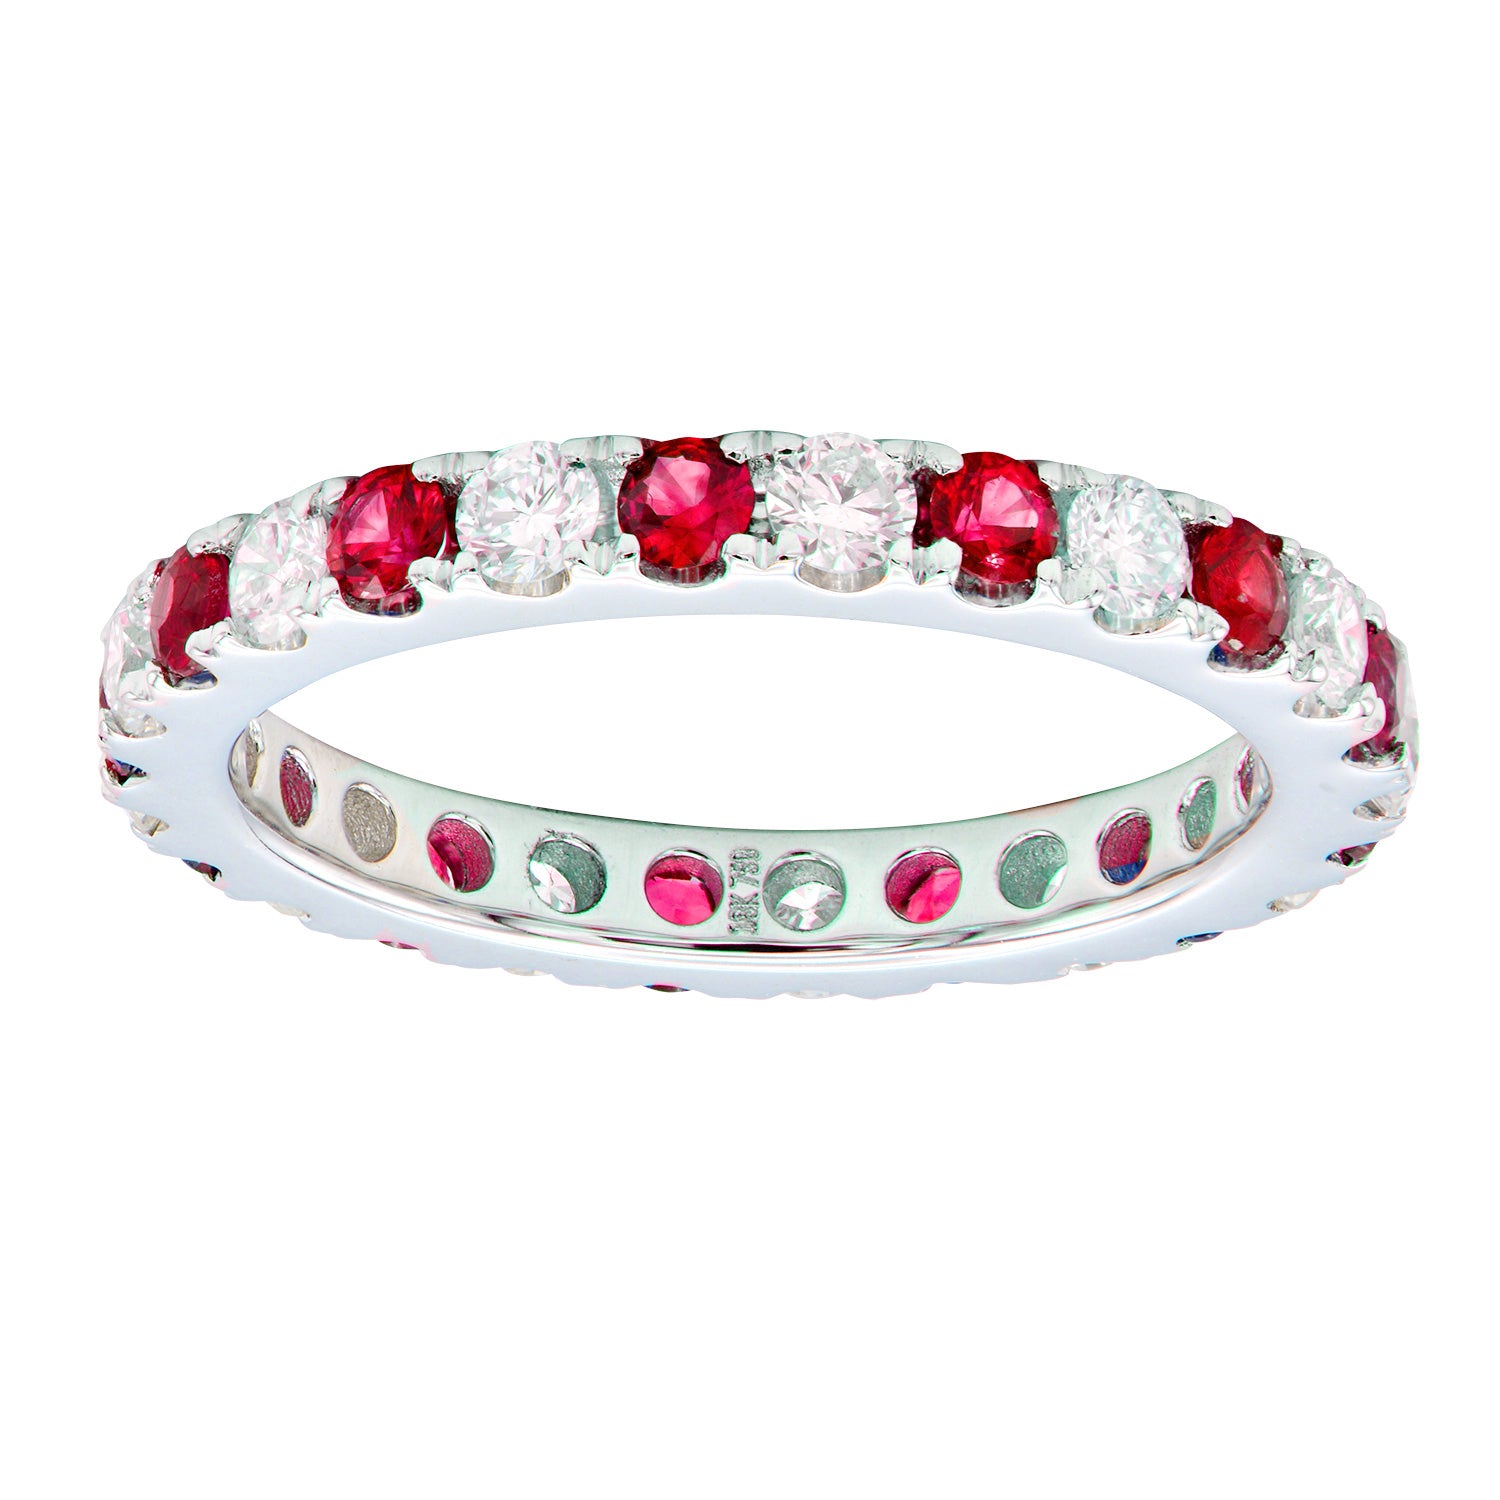 Ring 18KW/2.7G 13RD-0.59CT 13RUBY-0.80CT